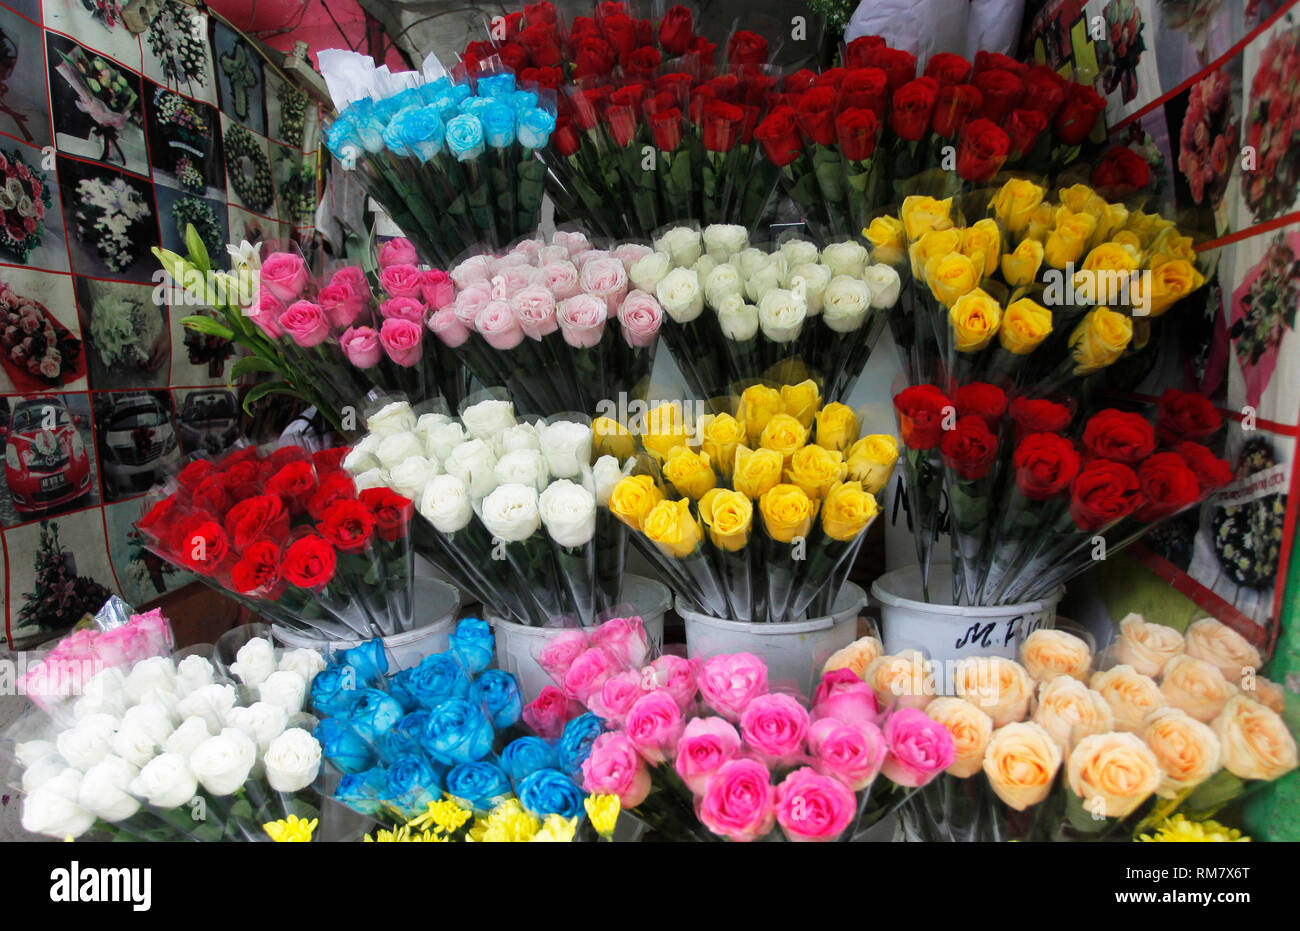 Flowers are seen in one of the flower and coral flower shops.  Ahead of the Valentine's Day commemoration, flower shops began to be visited by buyers to express affection to their loved ones. Stock Photo